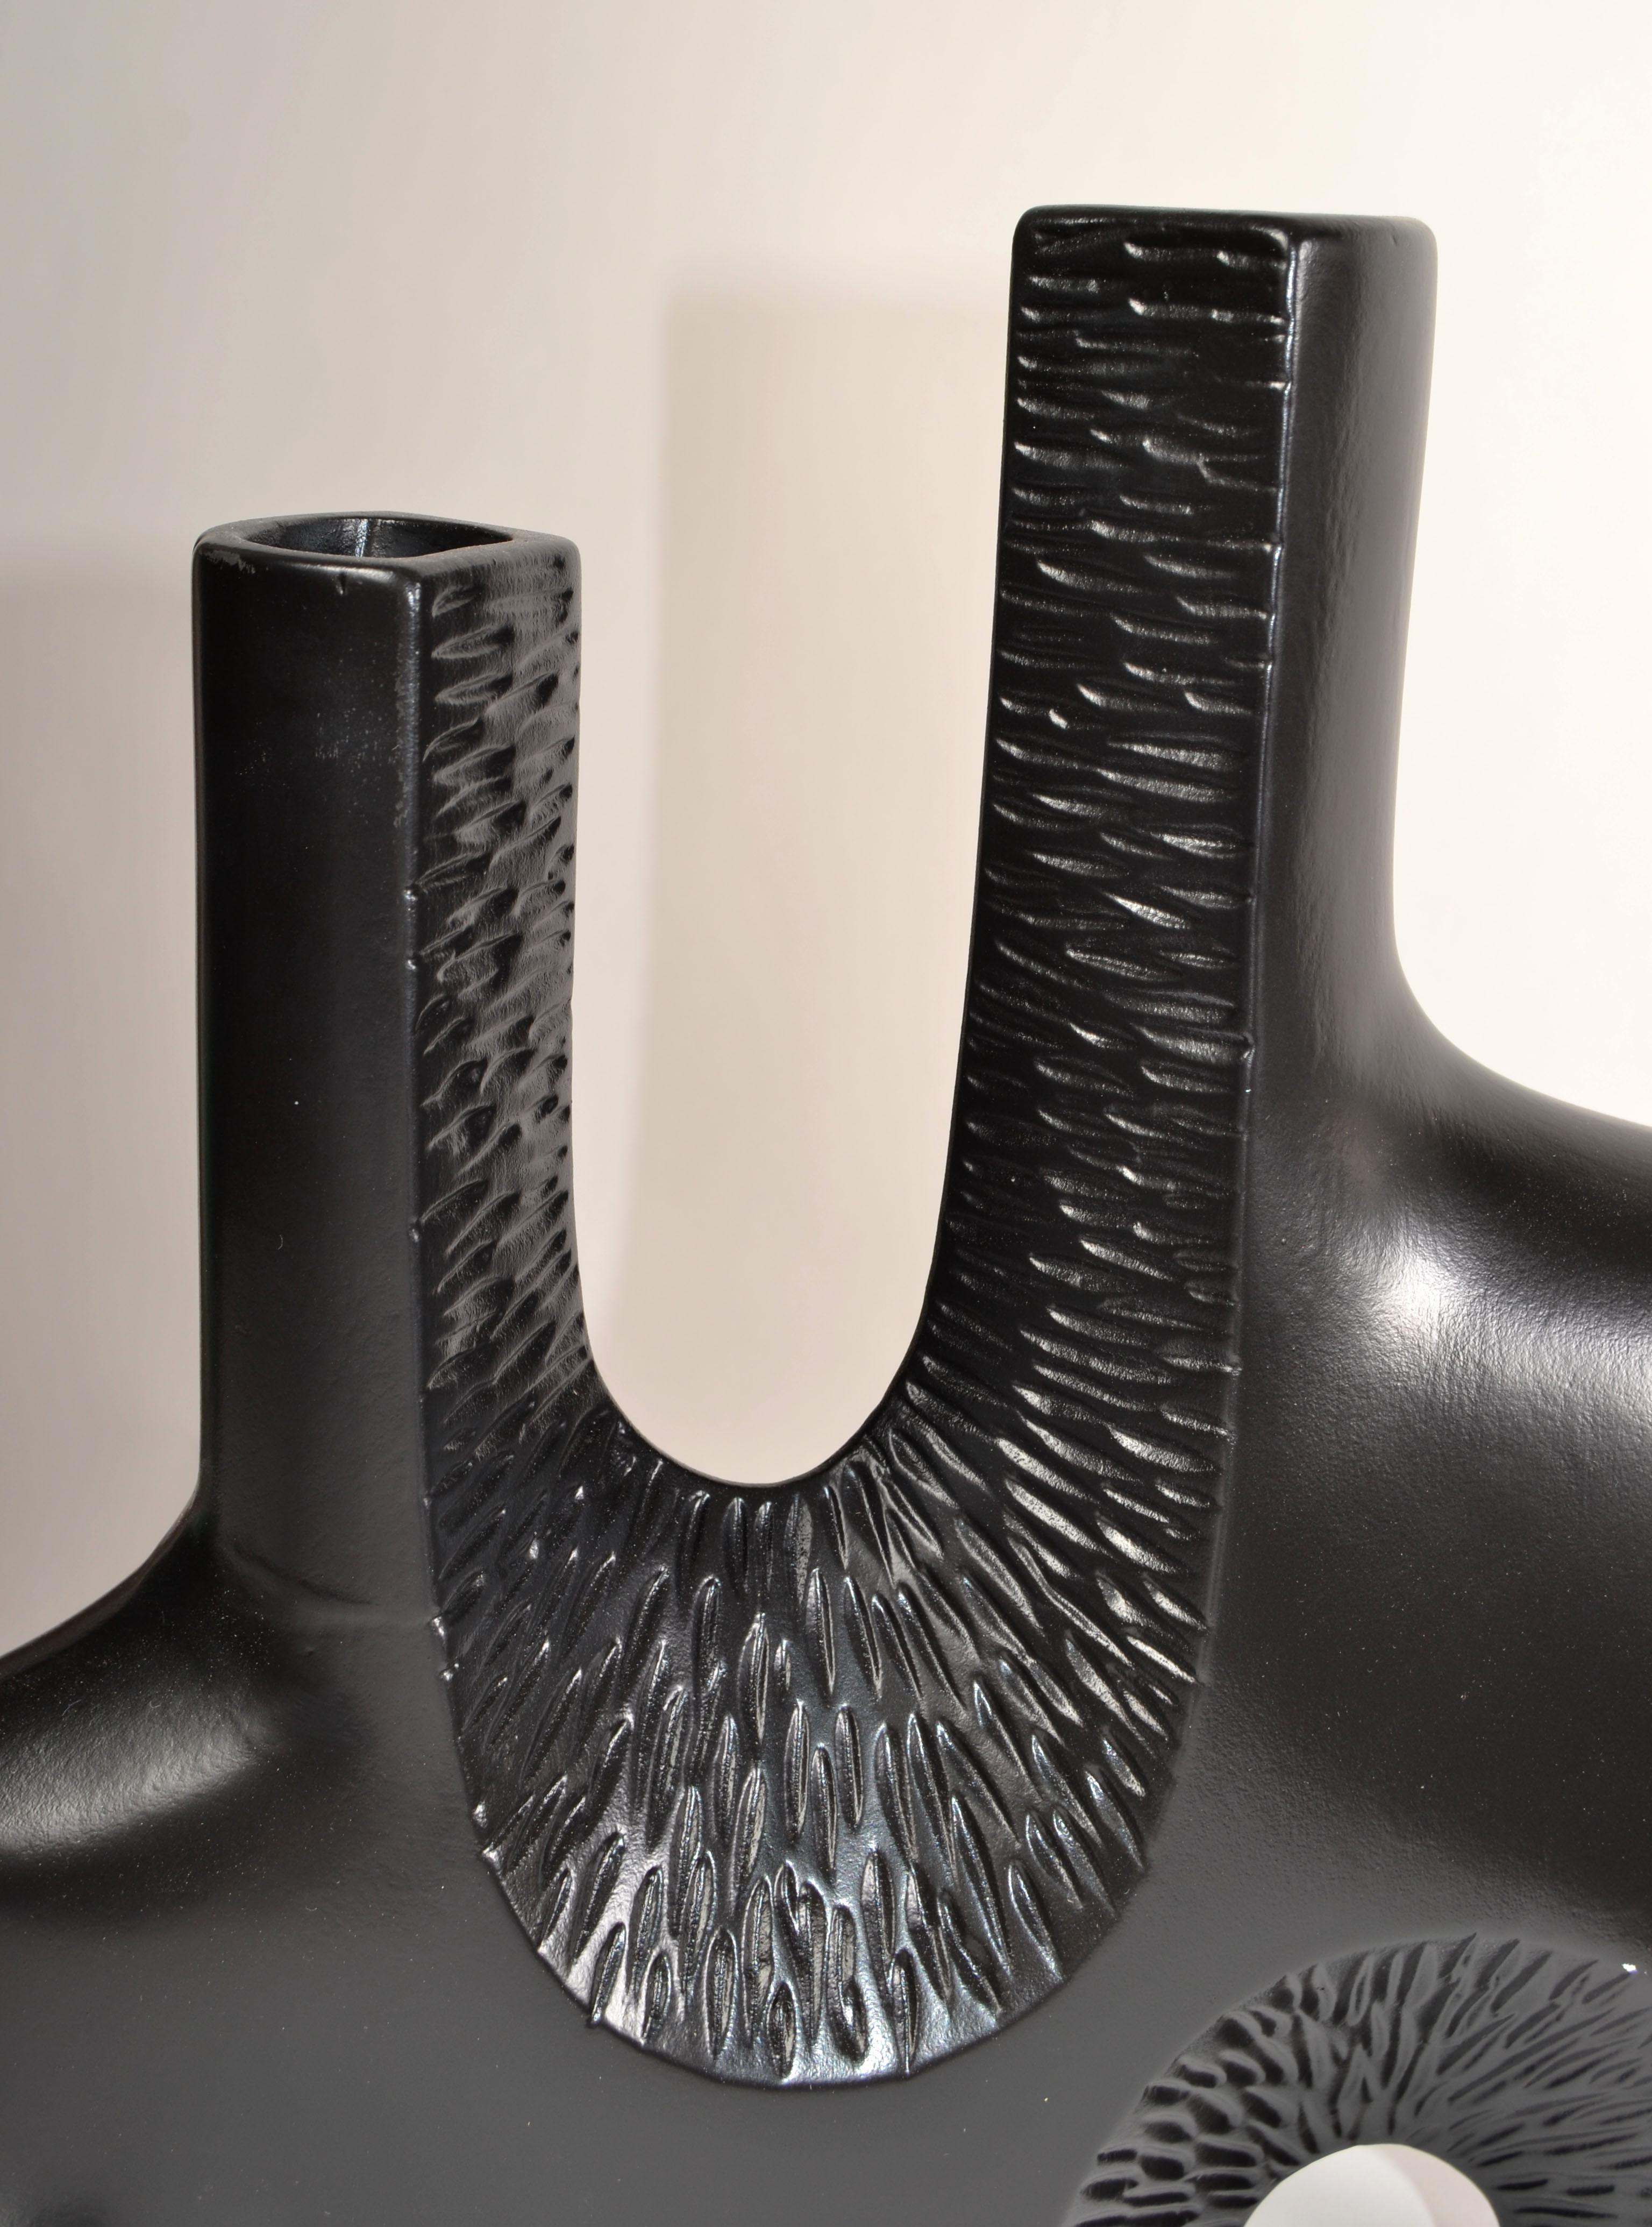 1980s Abstract Textured Two Neck Vase Vessel Black Finish Mid-Century Modern In Good Condition For Sale In Miami, FL